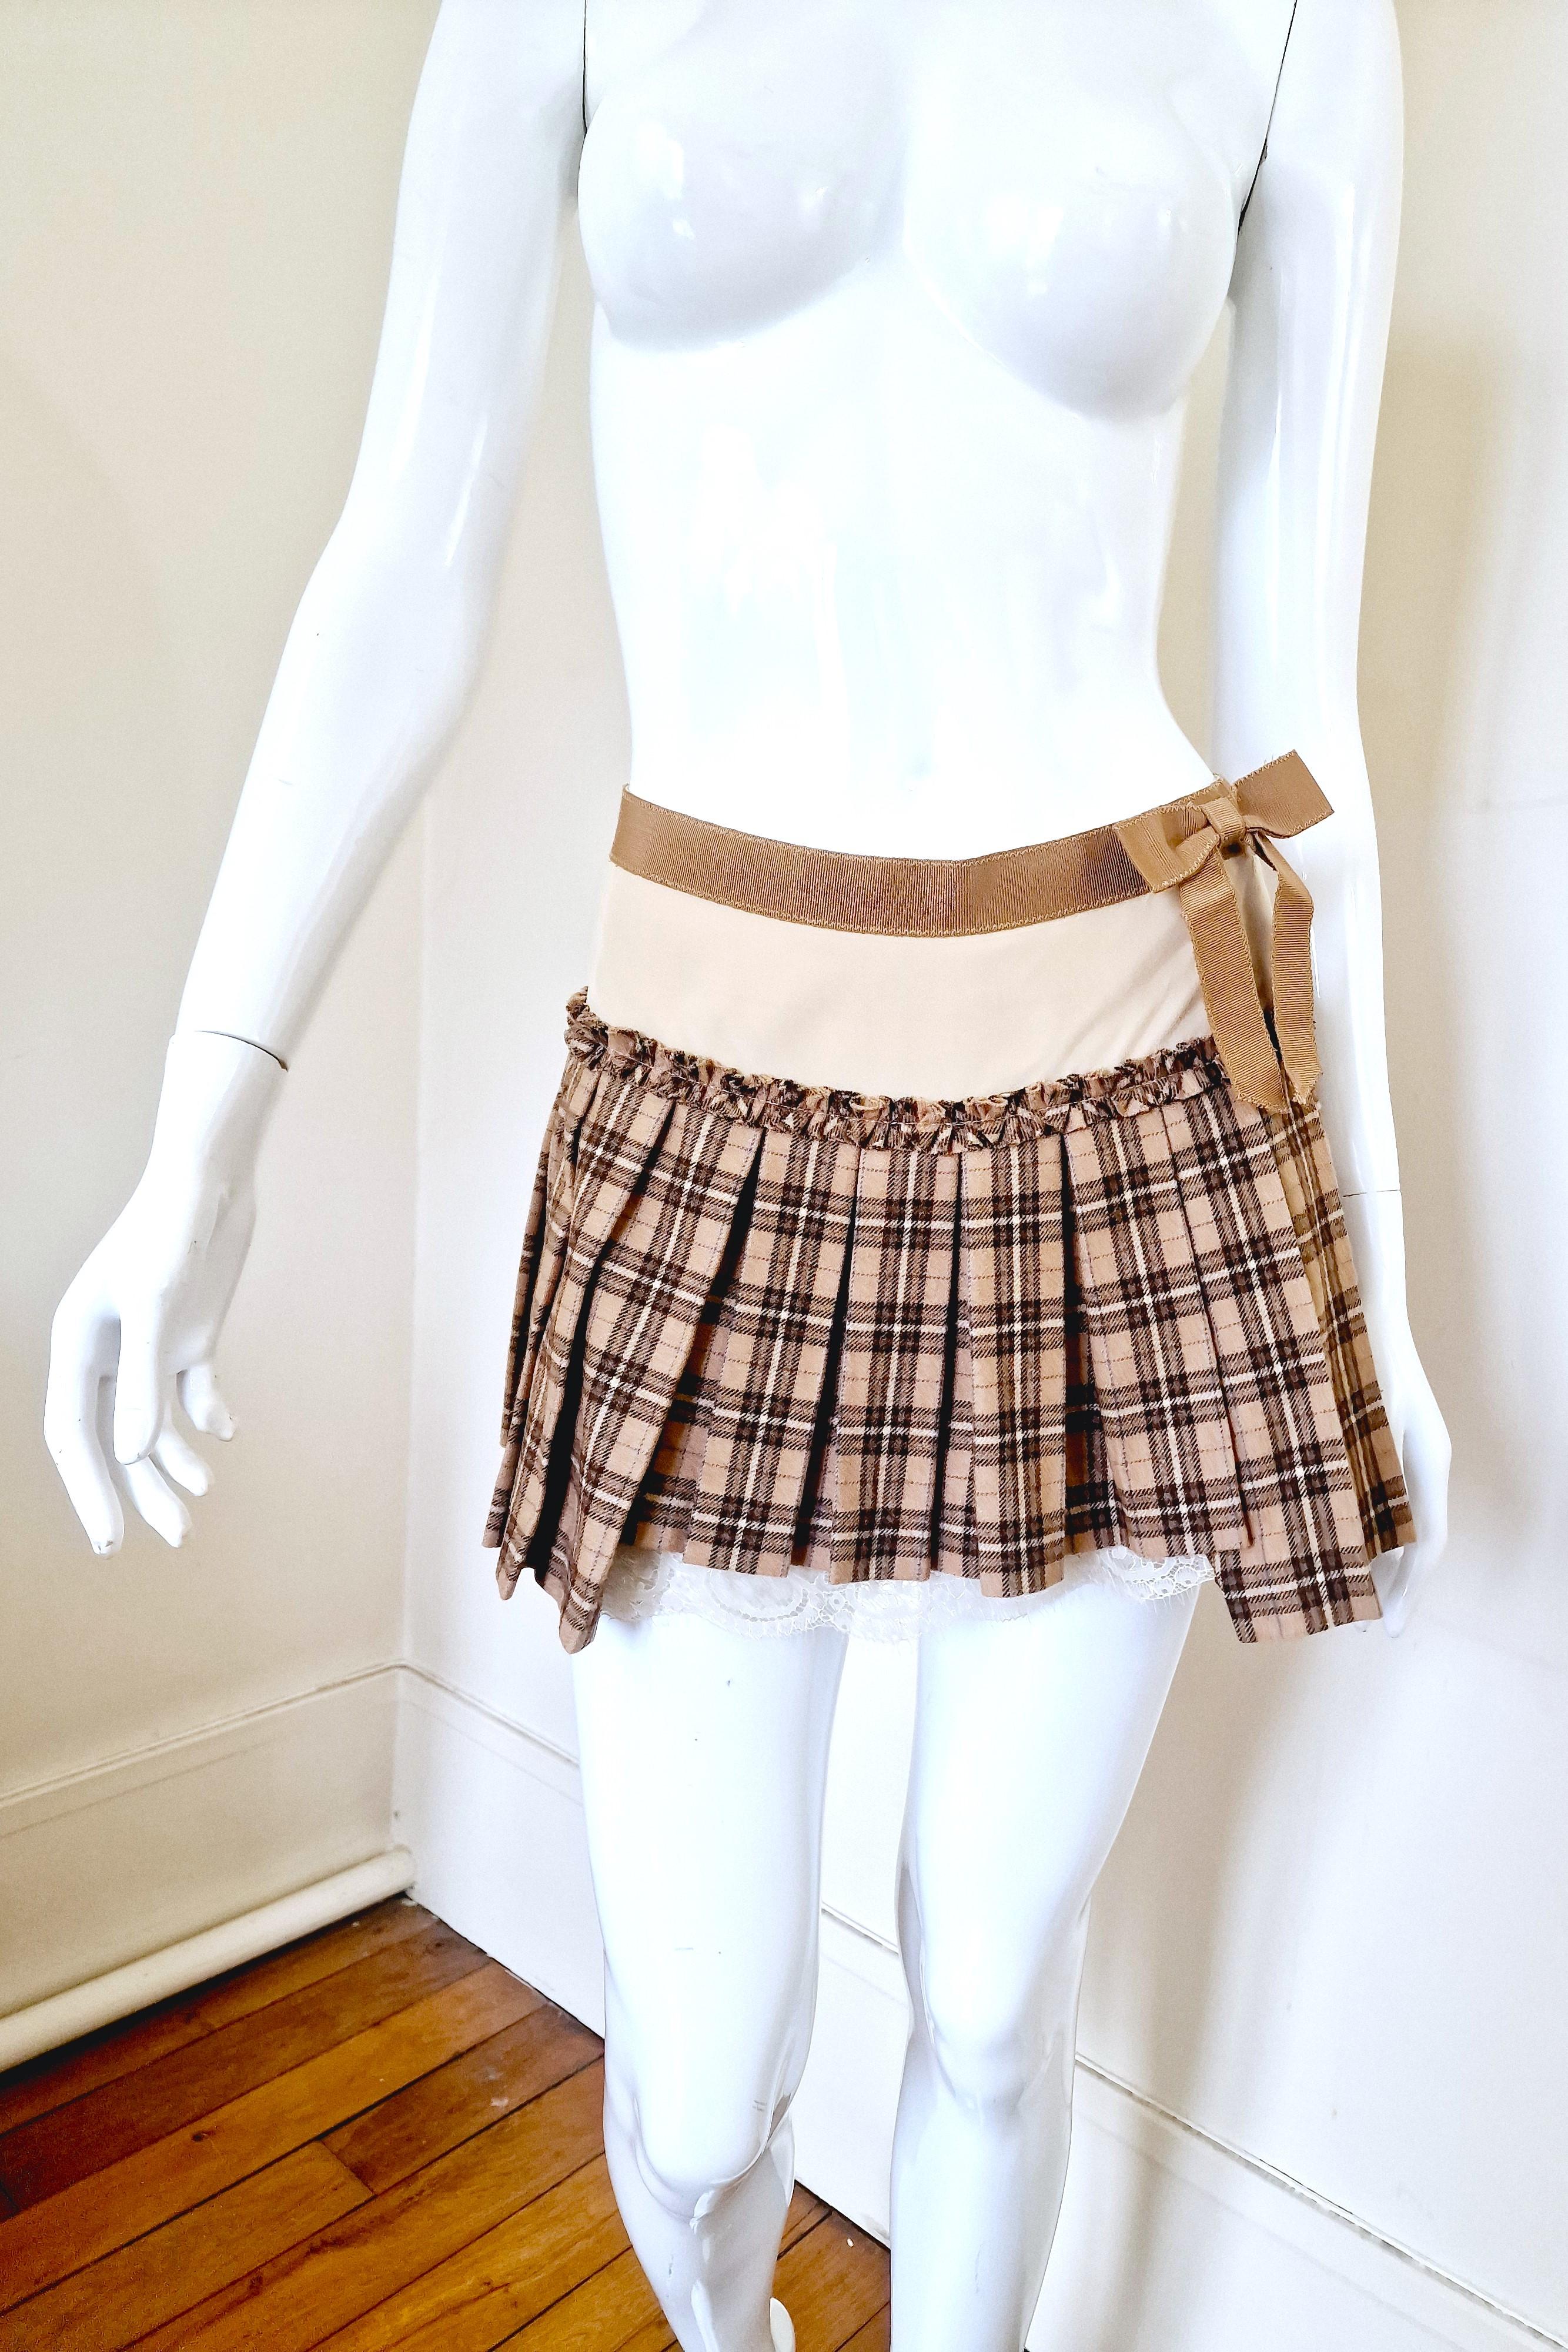 Tartan pleated skirt by D&G!
2 layers.
Shell: 62% Wool, 26% Polyamide, 12% Silk ( Lining: 100% Silk )

VERY GOOD condition!

Large.
Marked size: 42
Length: 33 cm / 13 inch
Waist: 40 cm / 15.7 inch

Made in Italy!